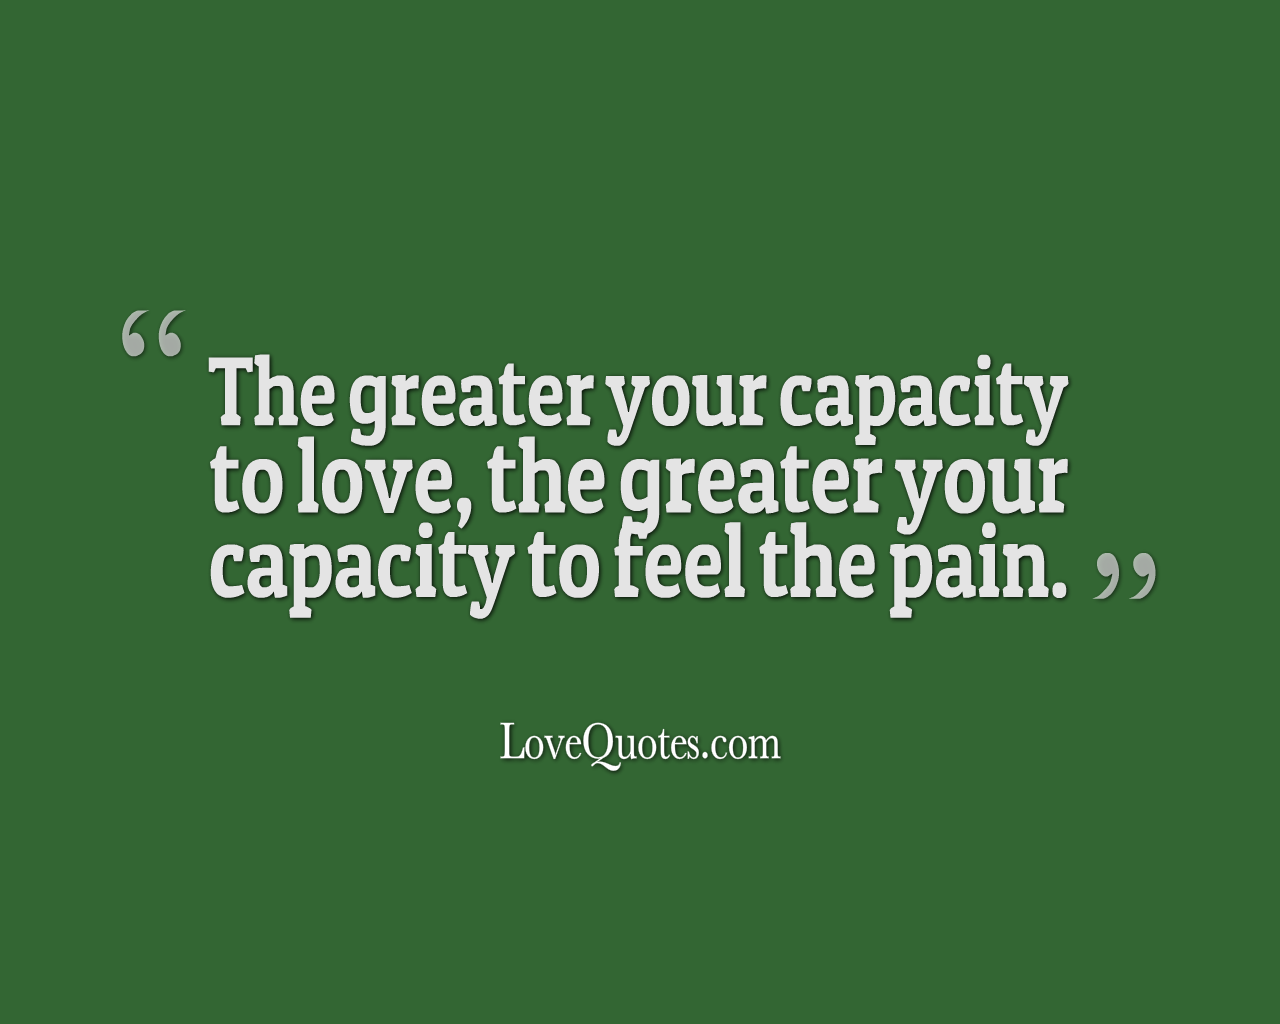 The Greater Your Capacity